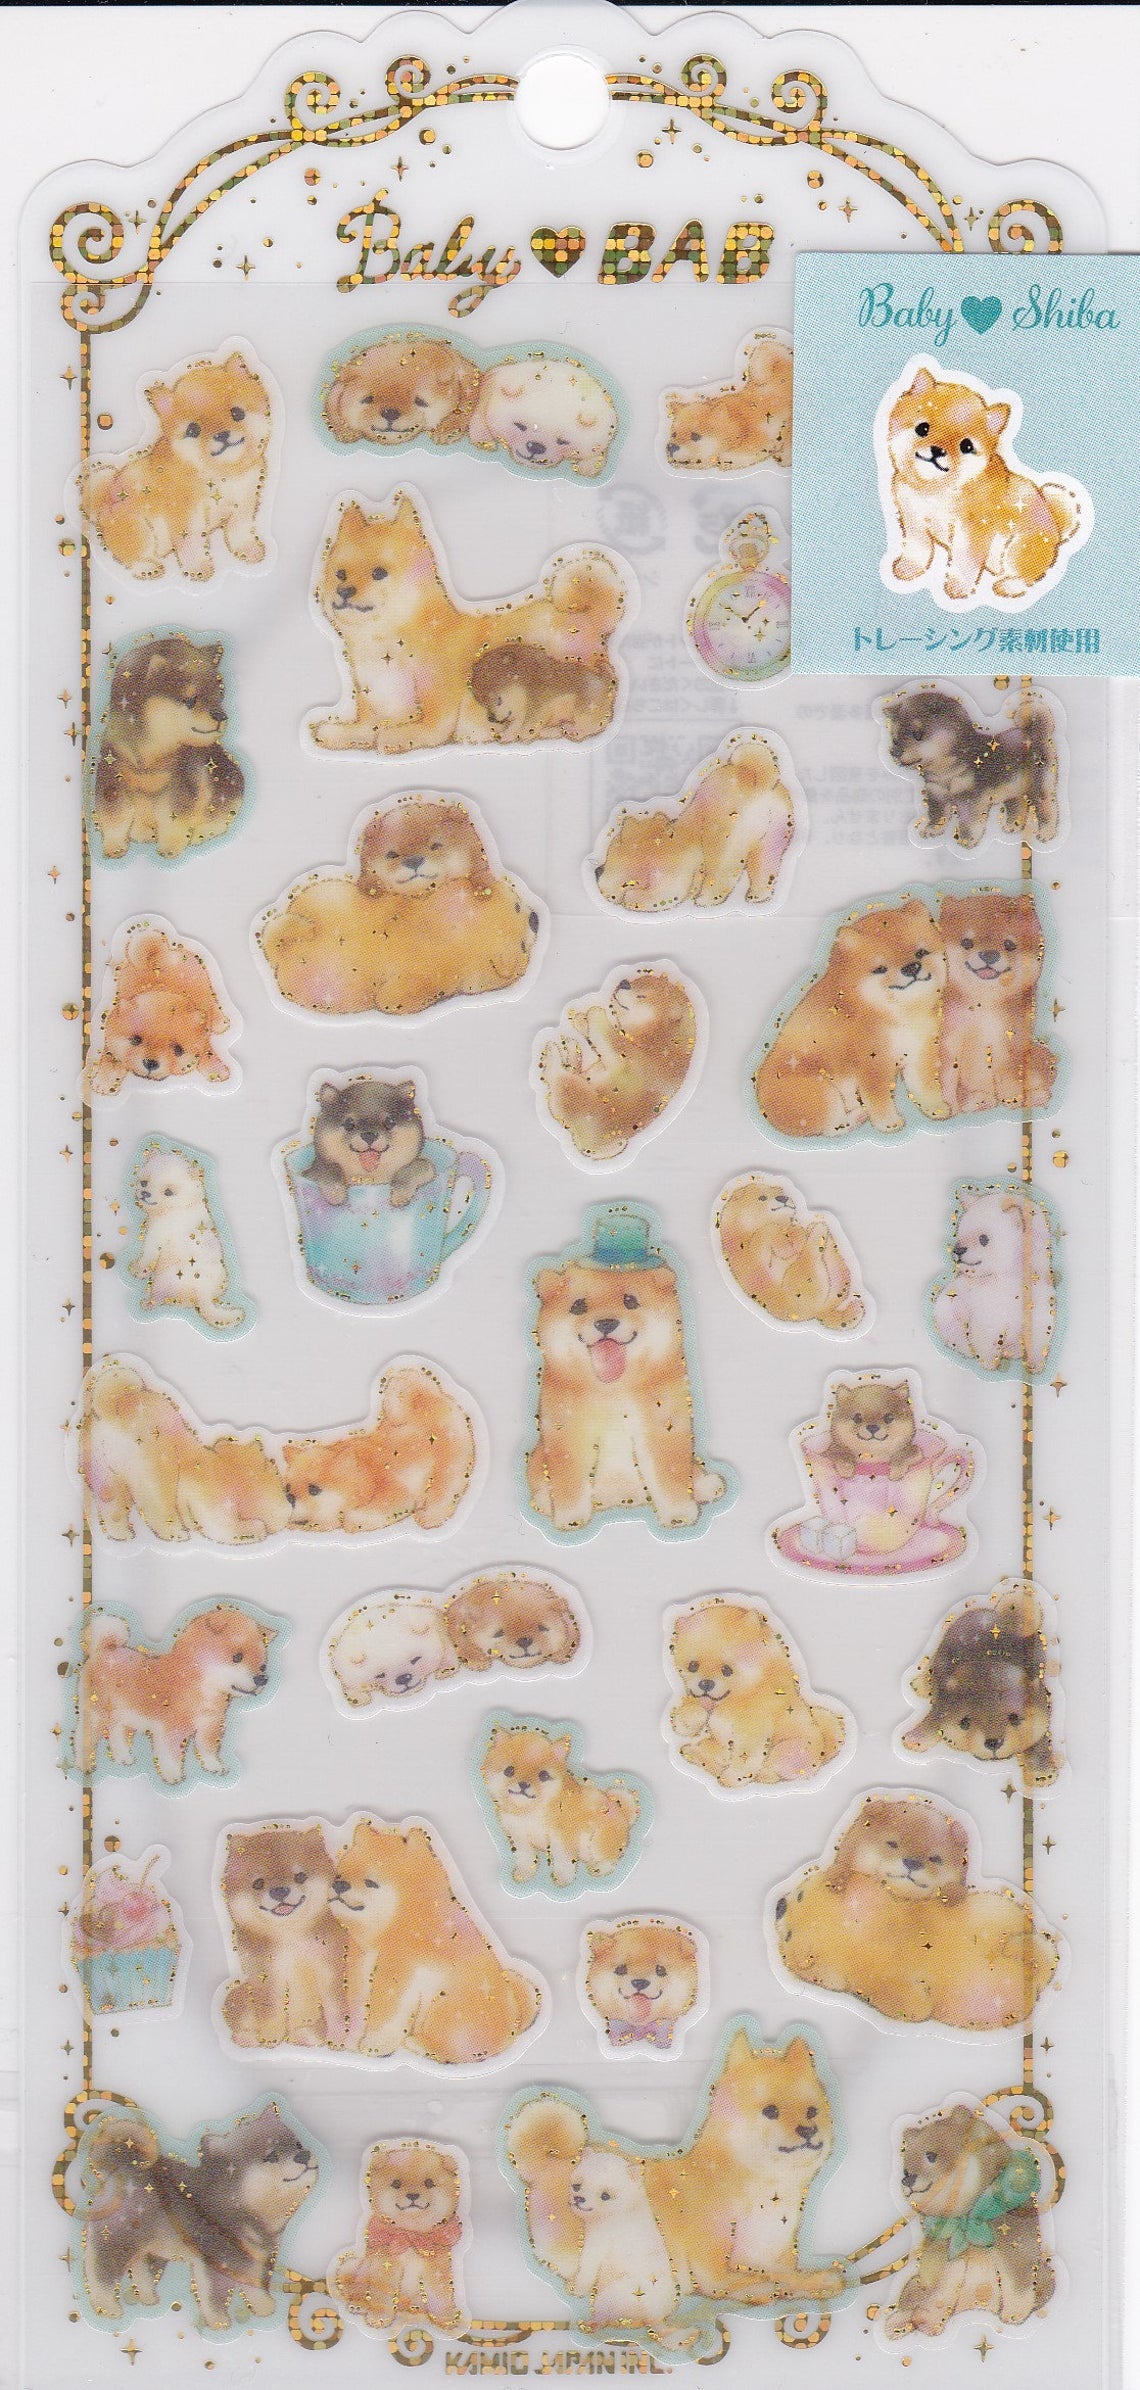 Dog Shiba Inu Baby Stickers with Gold Accent 09041